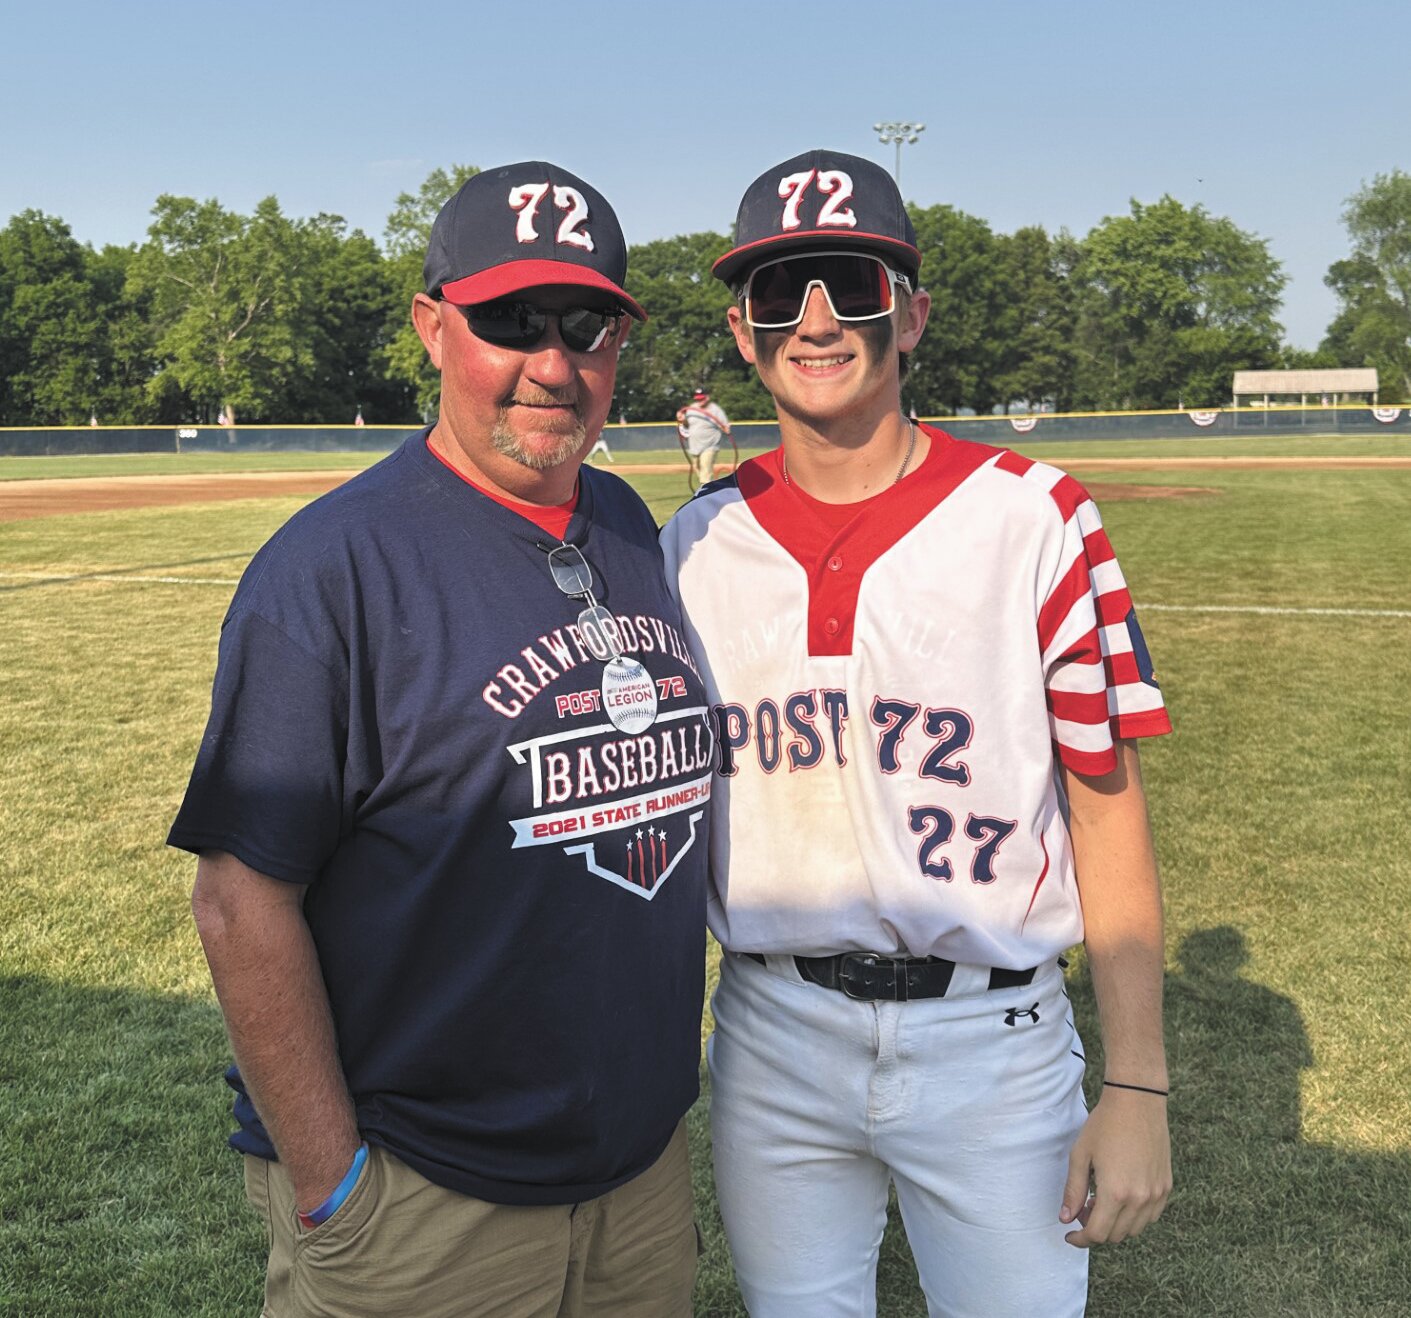 Father and son Jarrod (right) and Kevin (left) Kirsch will get to experience being on the same field together during the Futures Game Showcase next Wednesday at Loeb Stadium when Jarrod throws and Kevin will be part of the umpiring crew.